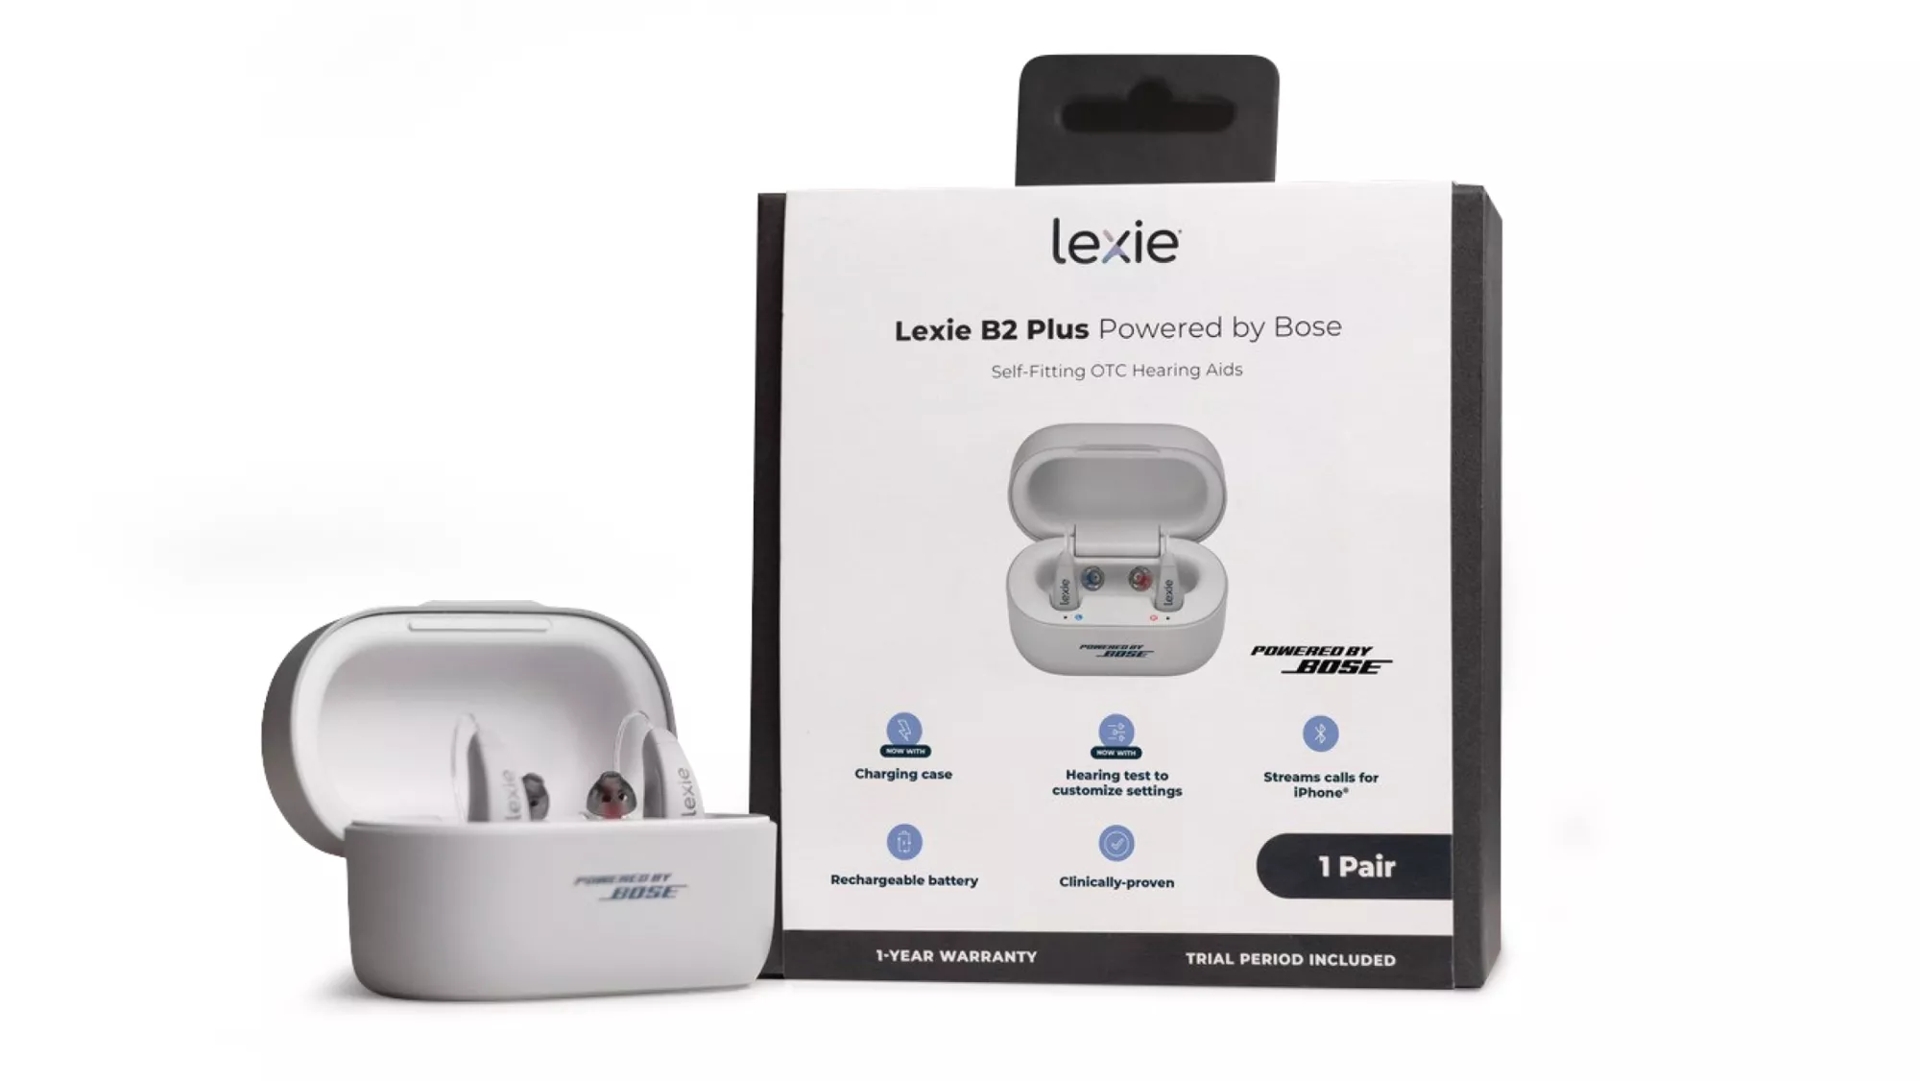 Lexie B2 Plus self-fitting OTC Hearing Aids in their case next to the product’s carton